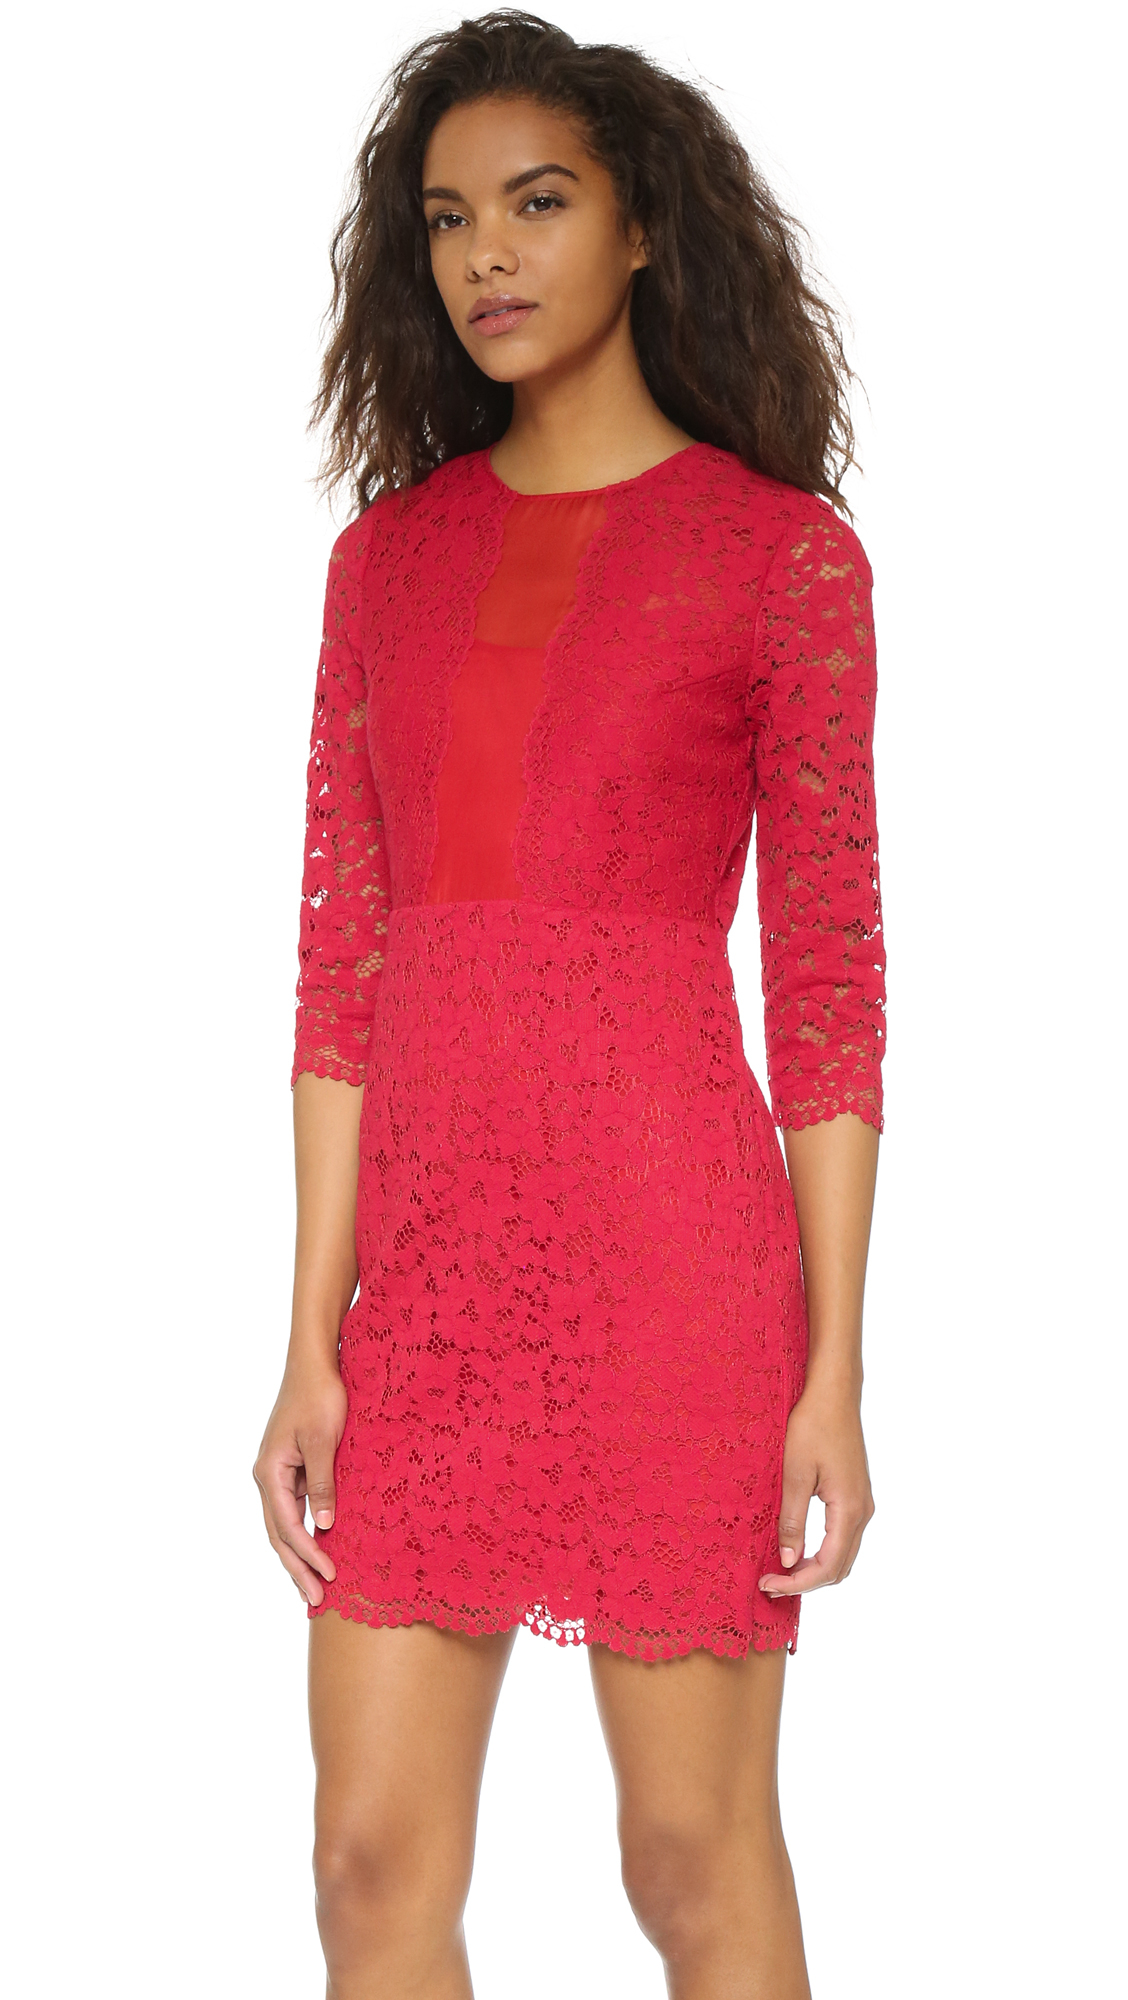 Lyst - Dkny Lace Dress in Red